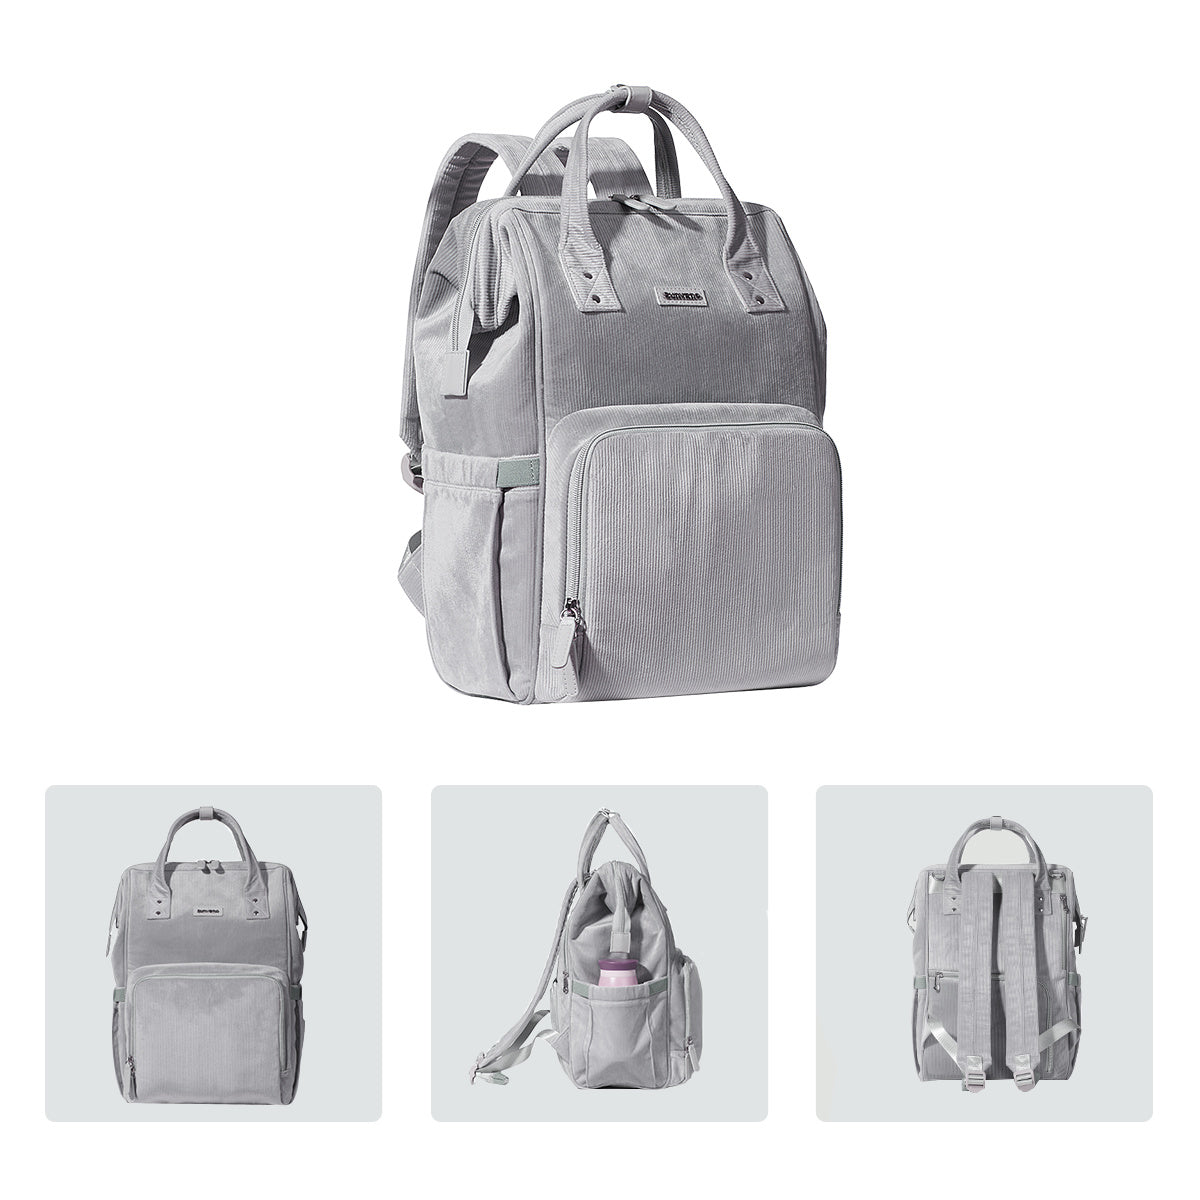 A gray SUNVENO Velvet Stitching Diaper Bag Backpack Large Capacity Tote Shoulder Nappy Bag Organizer for Baby Care with Insulated Pockets, Waterproof Fabric with dual top handles, padded shoulder straps, a front zippered pocket, and side pockets. The bag has a rectangular shape with a textured fabric finish and multi-pockets large capacity, making it perfect as a travel mom bag or diaper backpack.